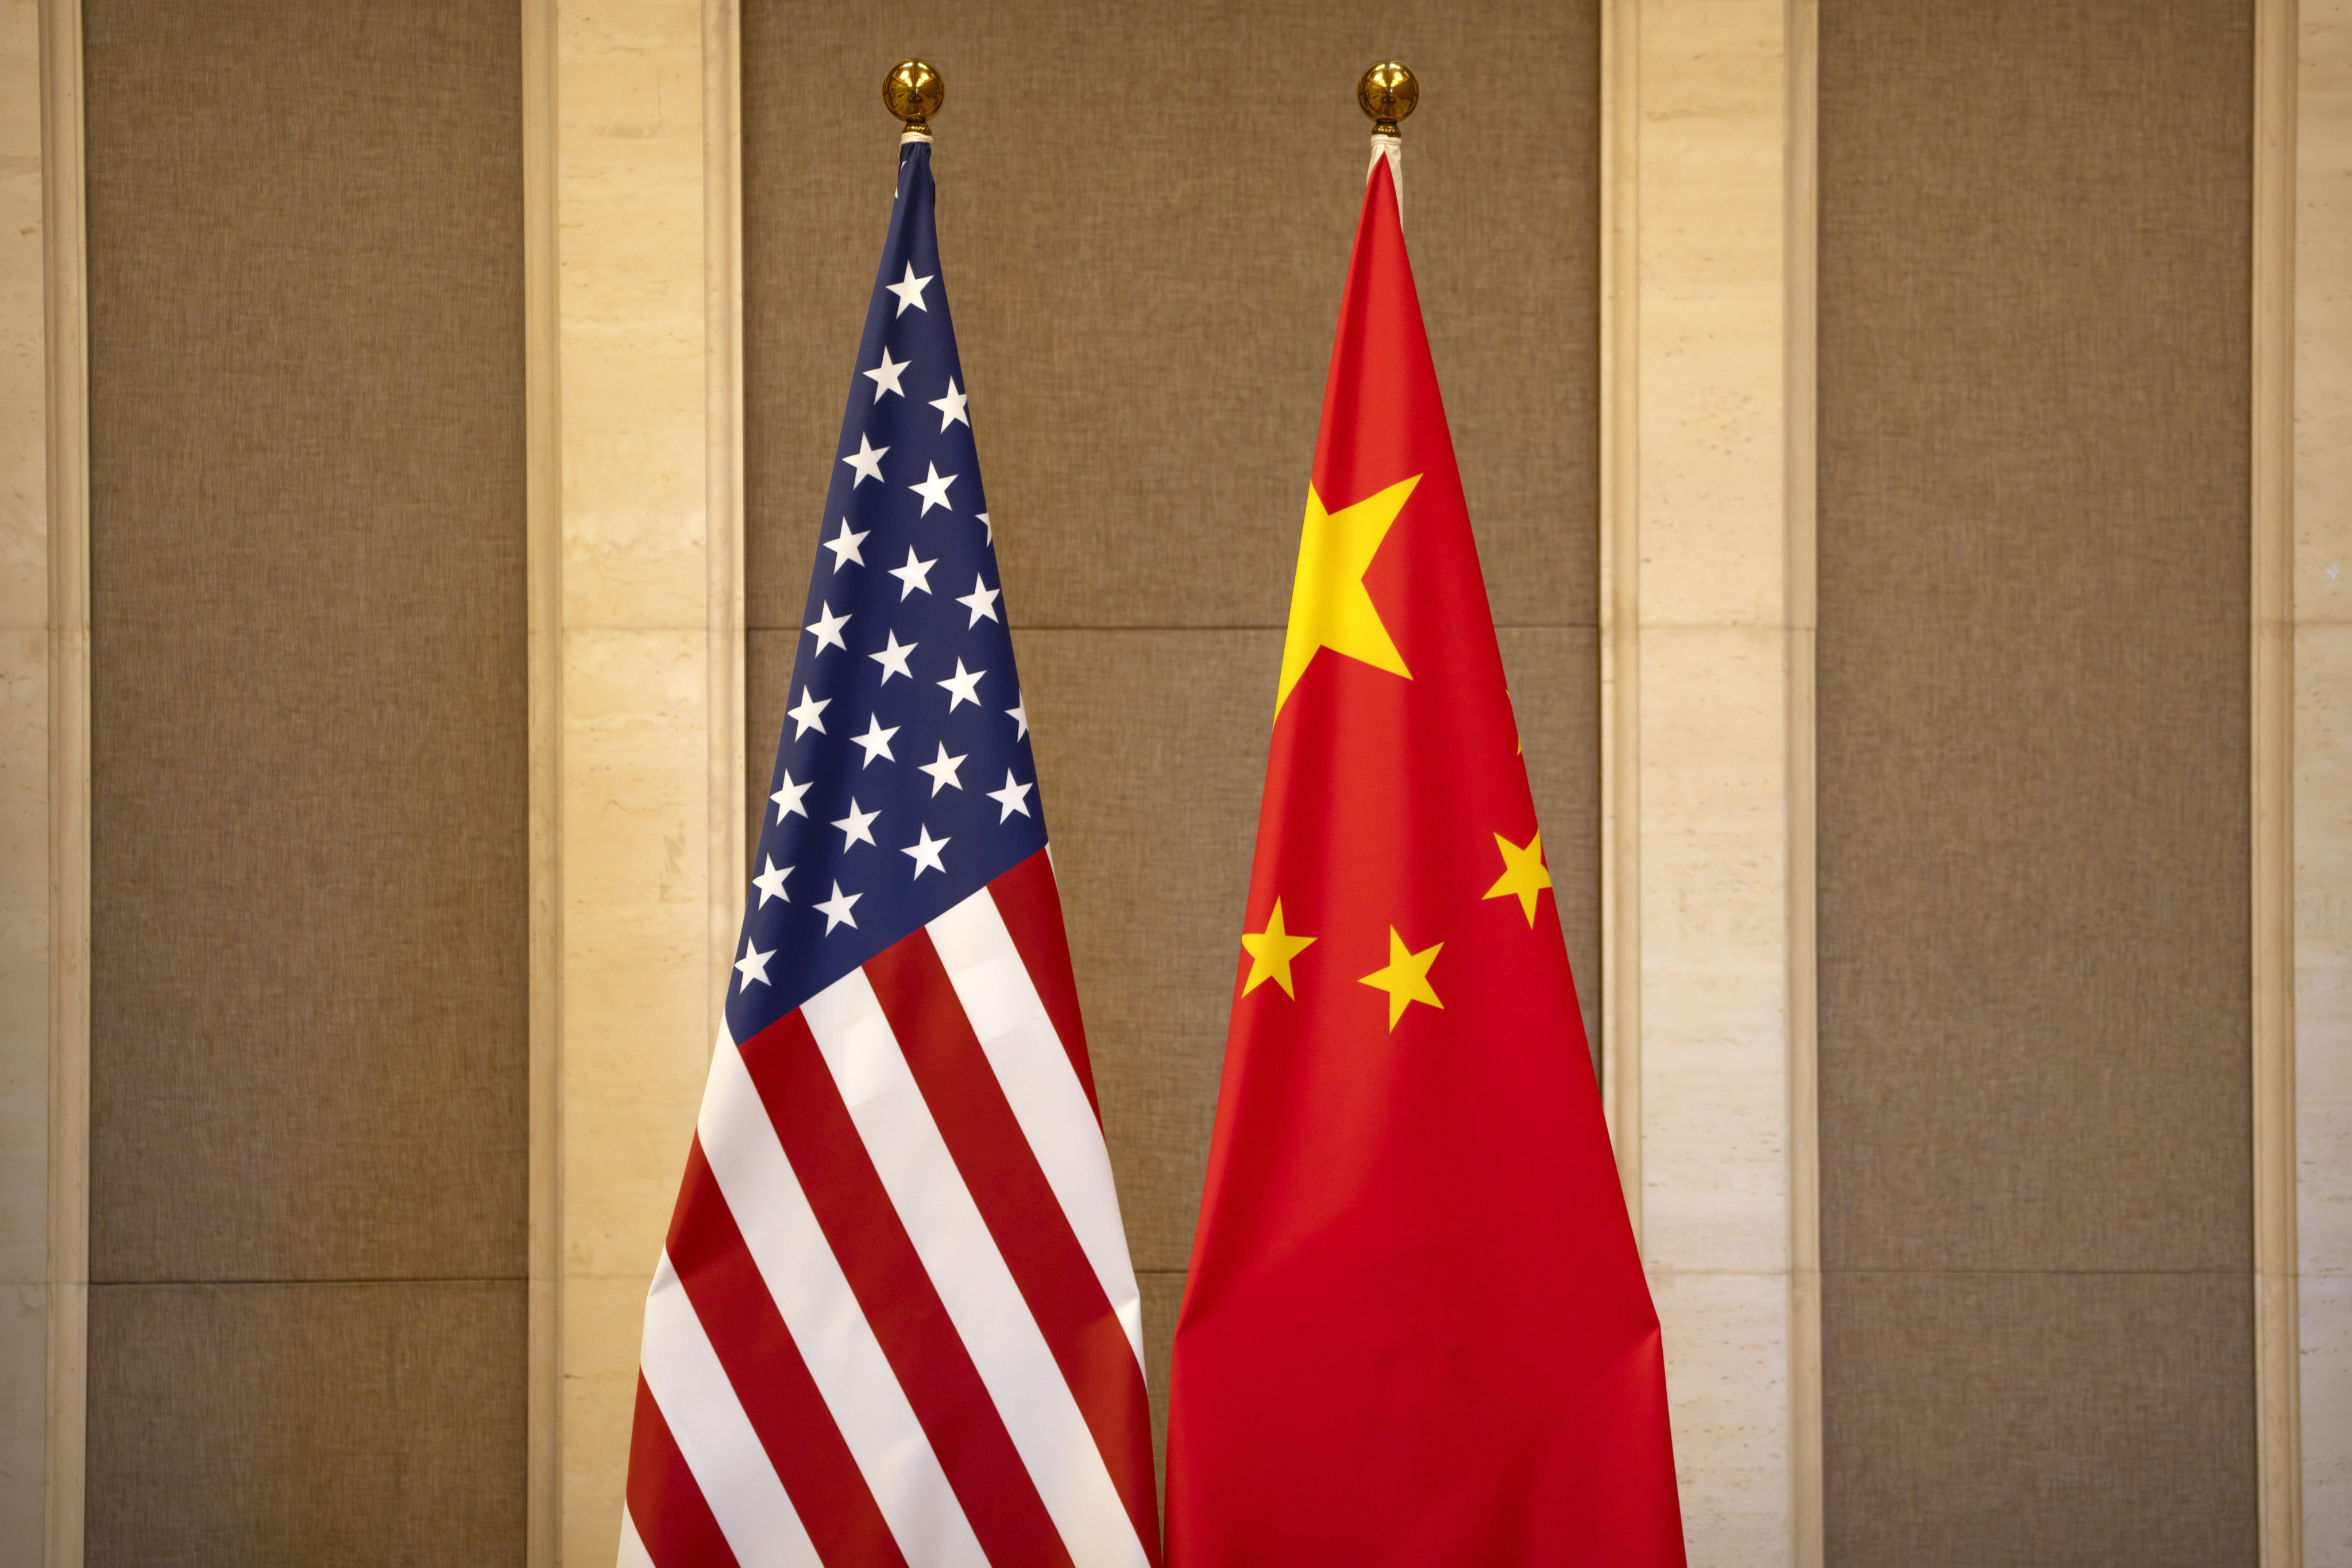 US and Chinese flags are set up before a meeting between Treasury Secretary Janet Yellen and Chinese Vice-Premier He Lifeng at the Diaoyutai State Guesthouse in Beijing on July 8. The mutual negative feeling among the Chinese and American peoples is worrying as it could fuel tensions between the two countries, which are already high. Photo: AP / Pool